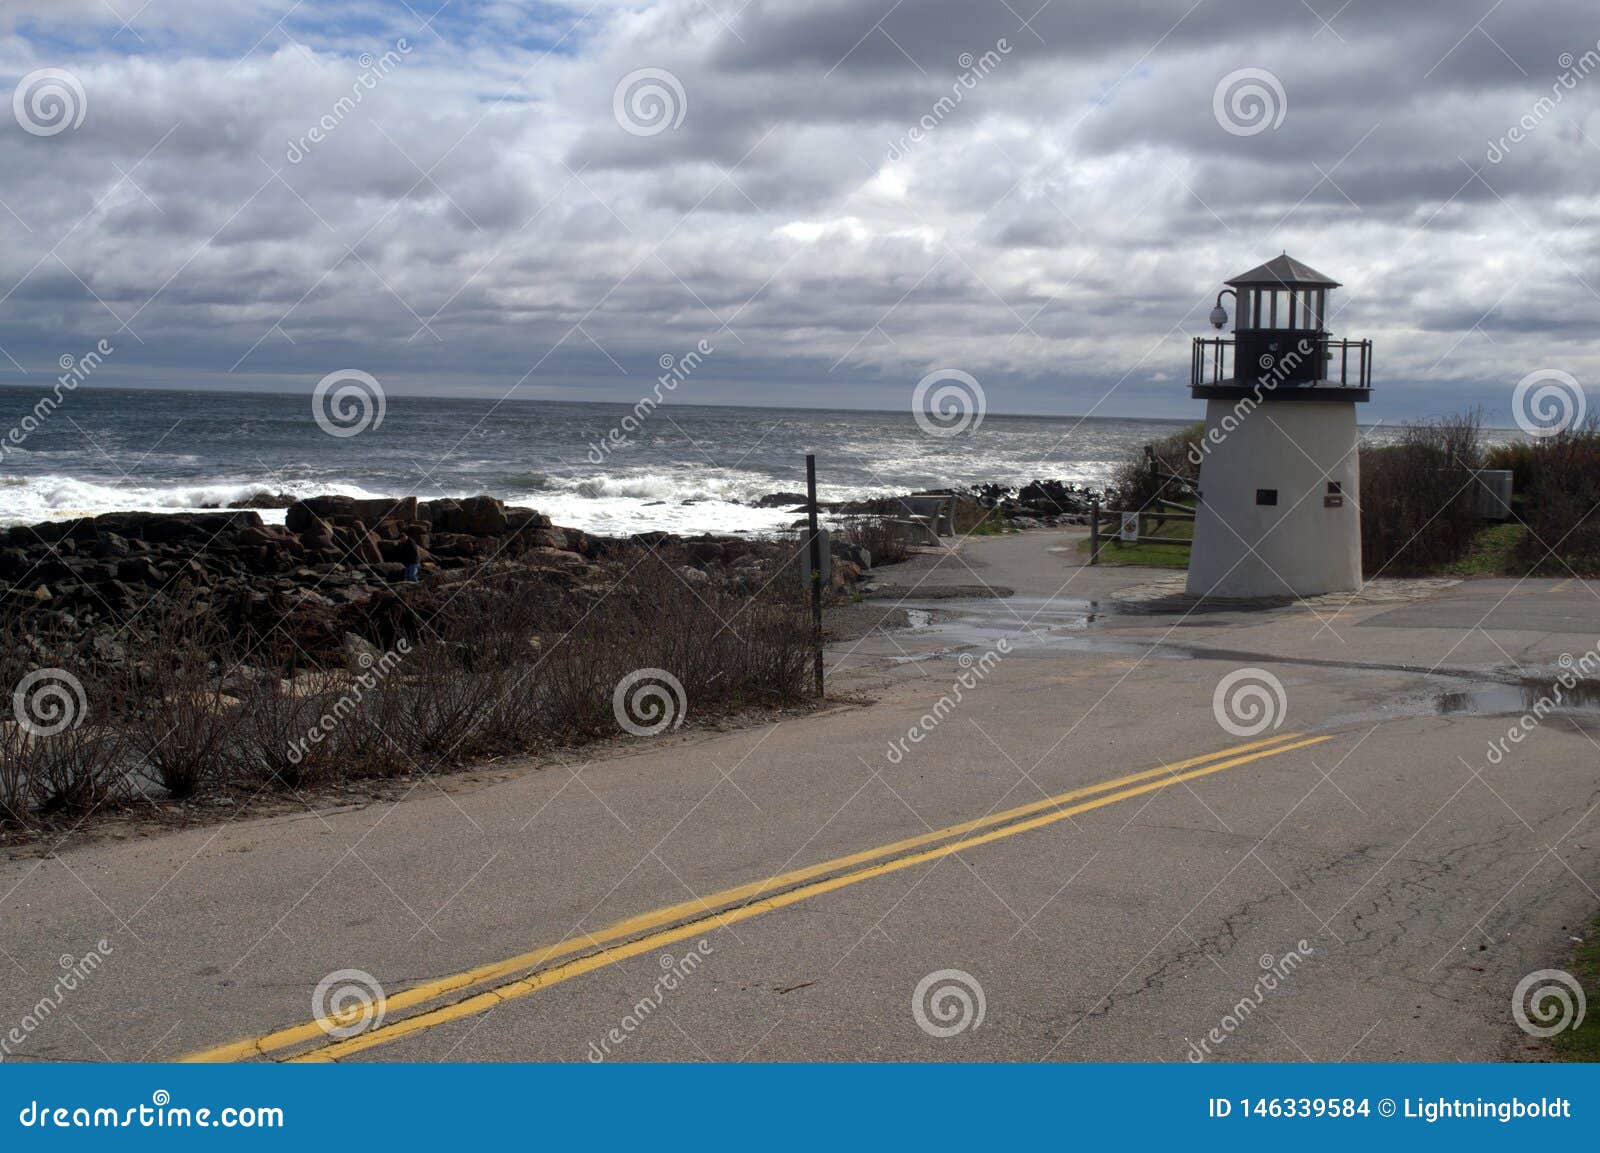 along the walkway on marginal way you will see a small lighthouse